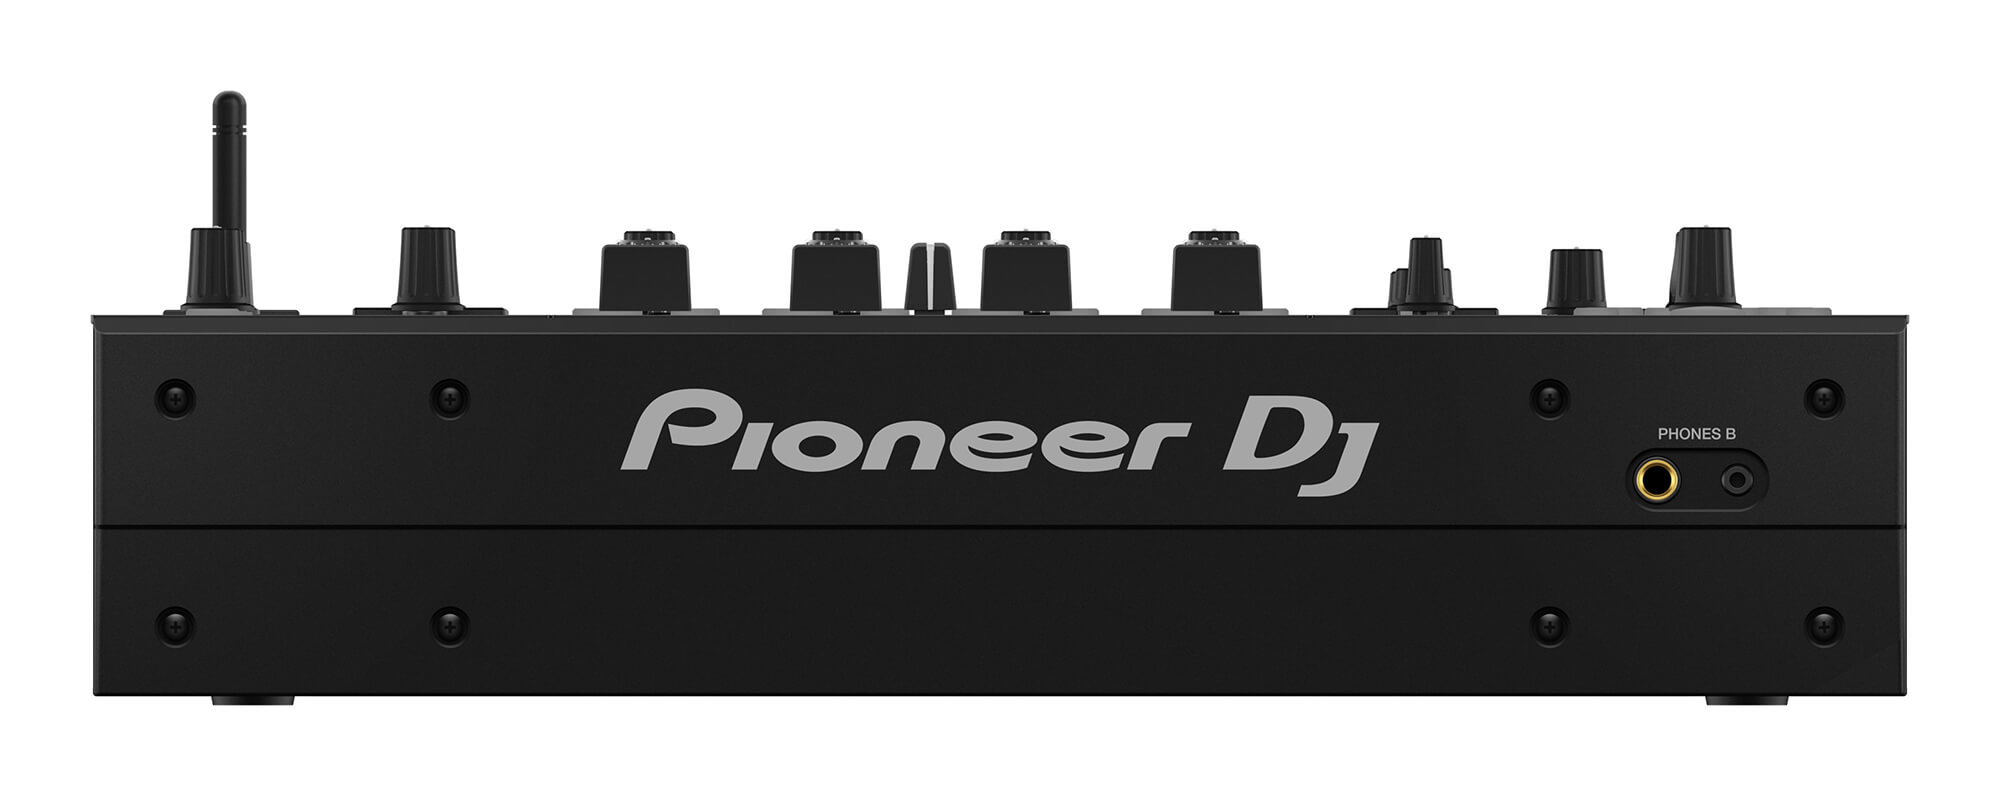 Everything you need to know about the Pioneer DJ DJM-A9 club mixer